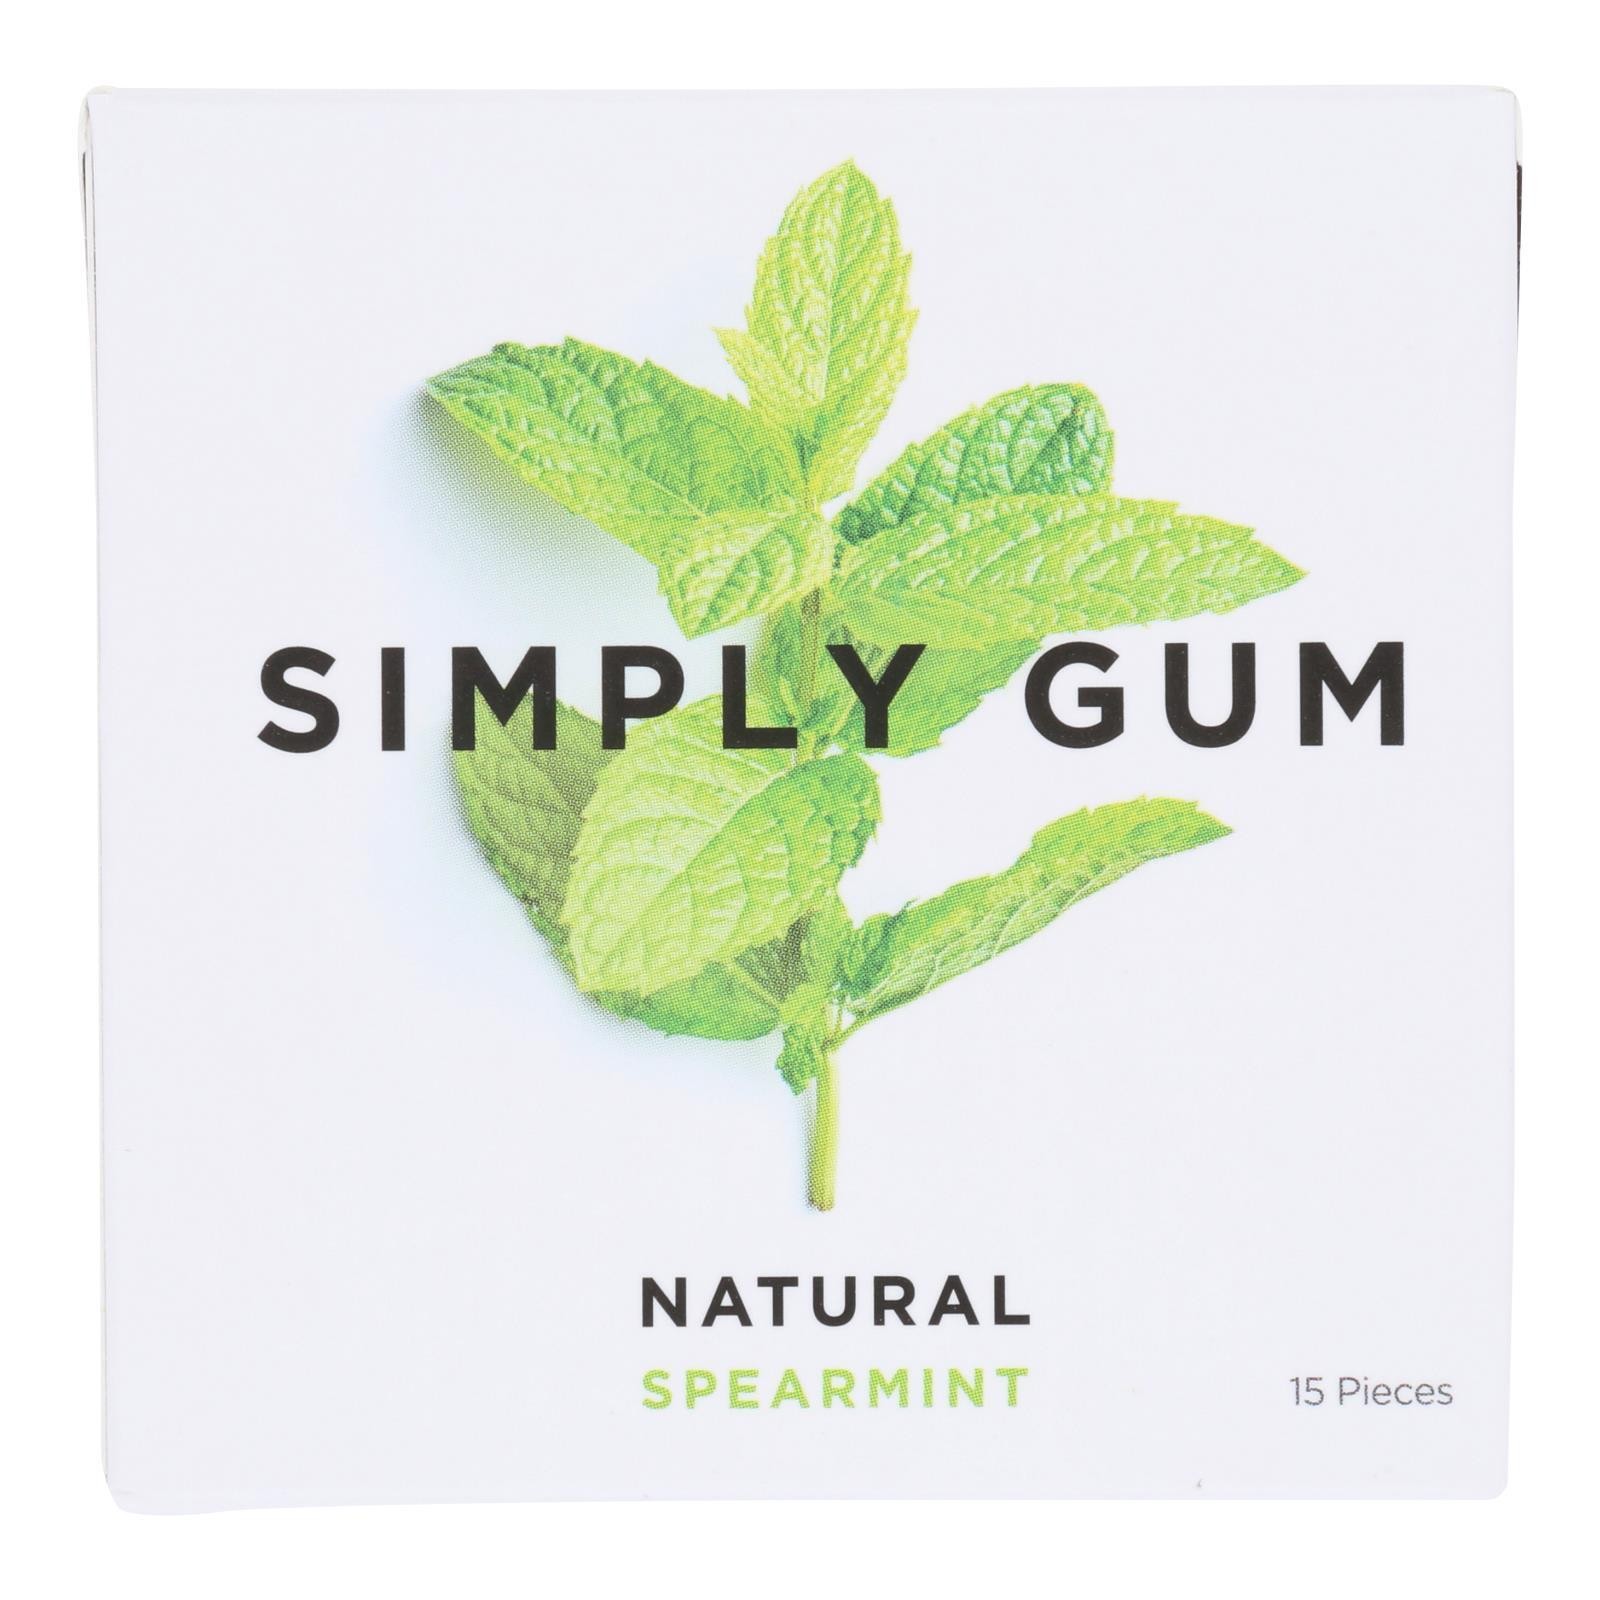 Simply Gum Spearmint Natural Chewing Gum